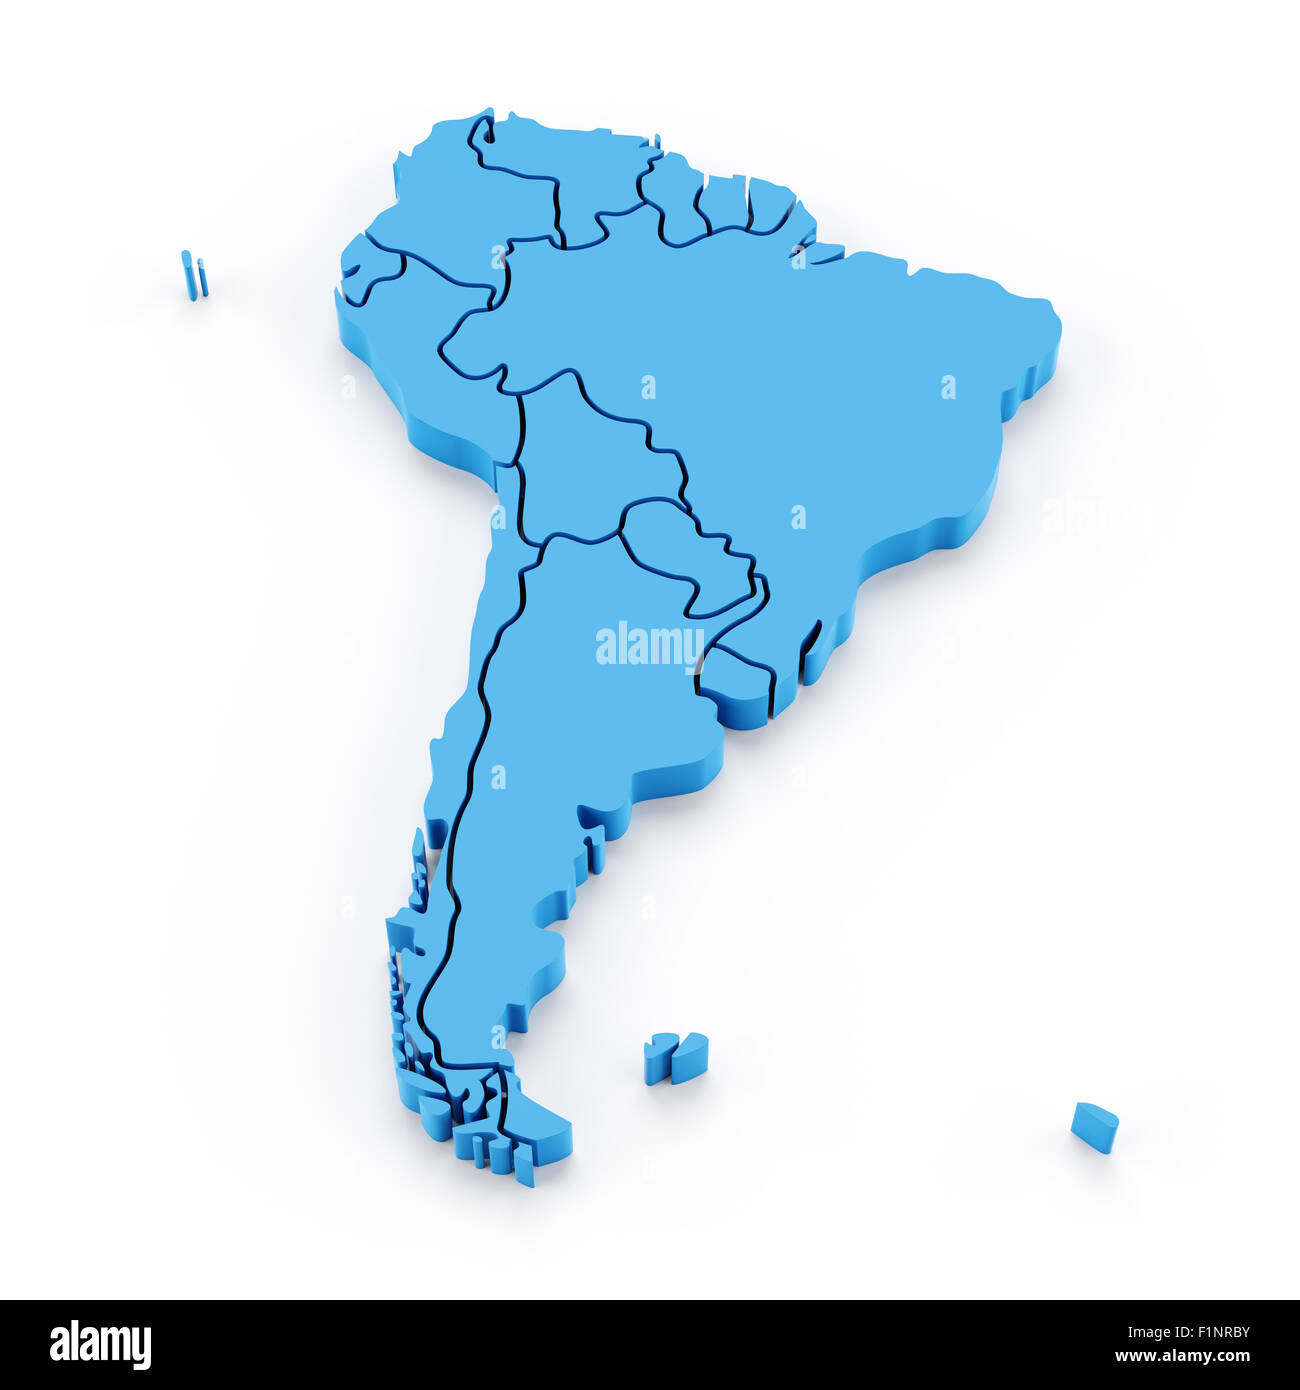 Extruded map of south america with national borders Stock Photo